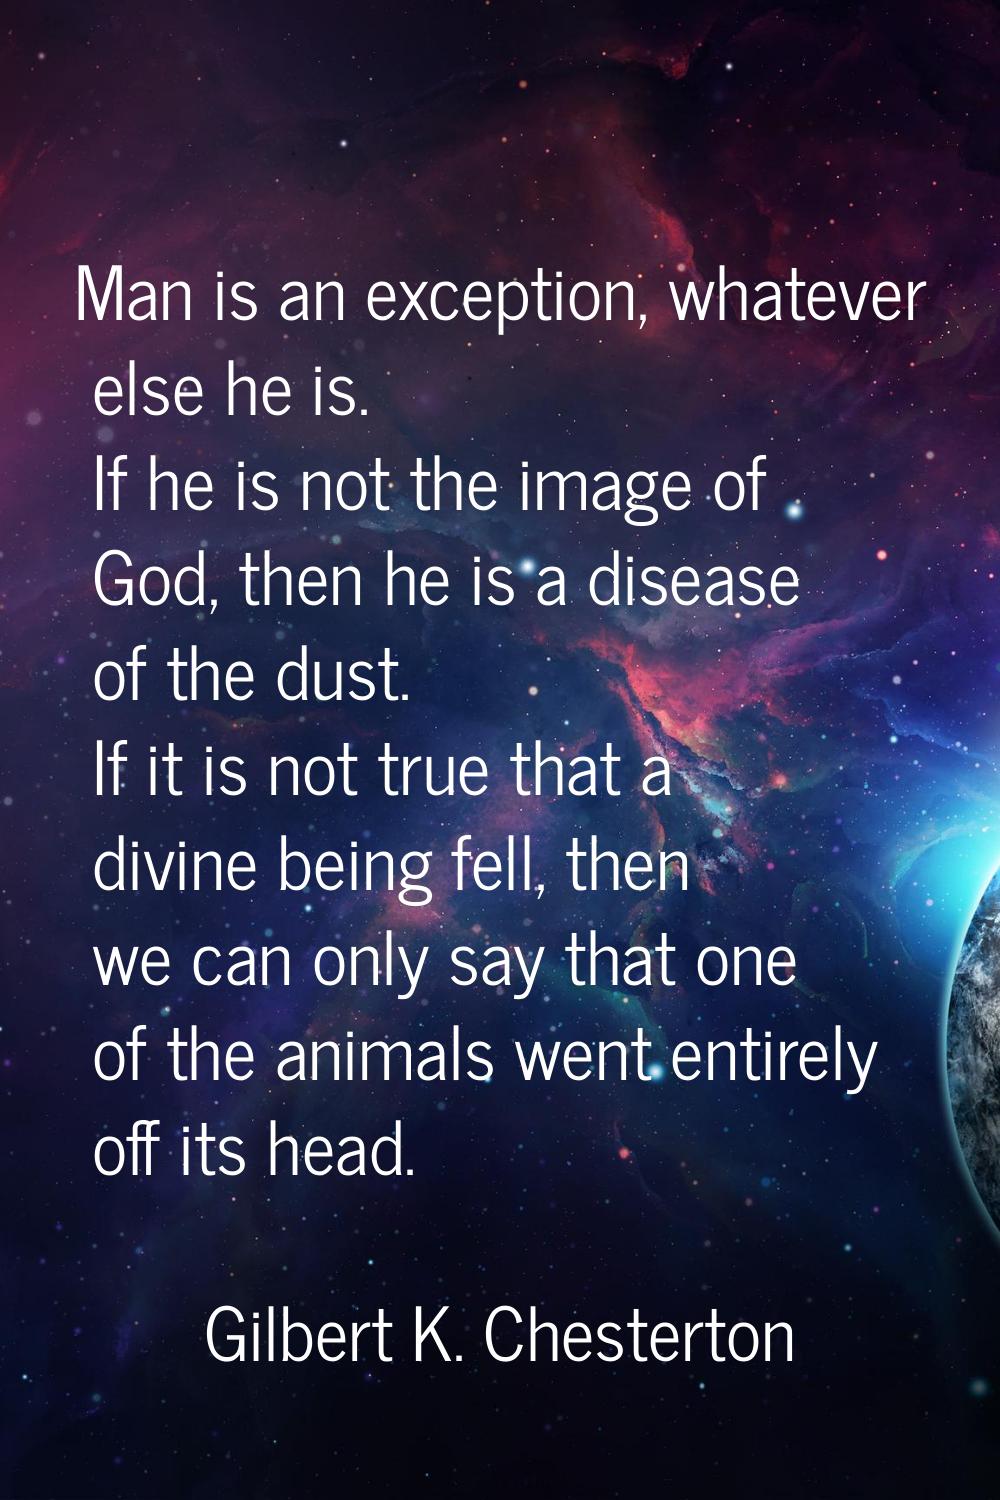 Man is an exception, whatever else he is. If he is not the image of God, then he is a disease of th